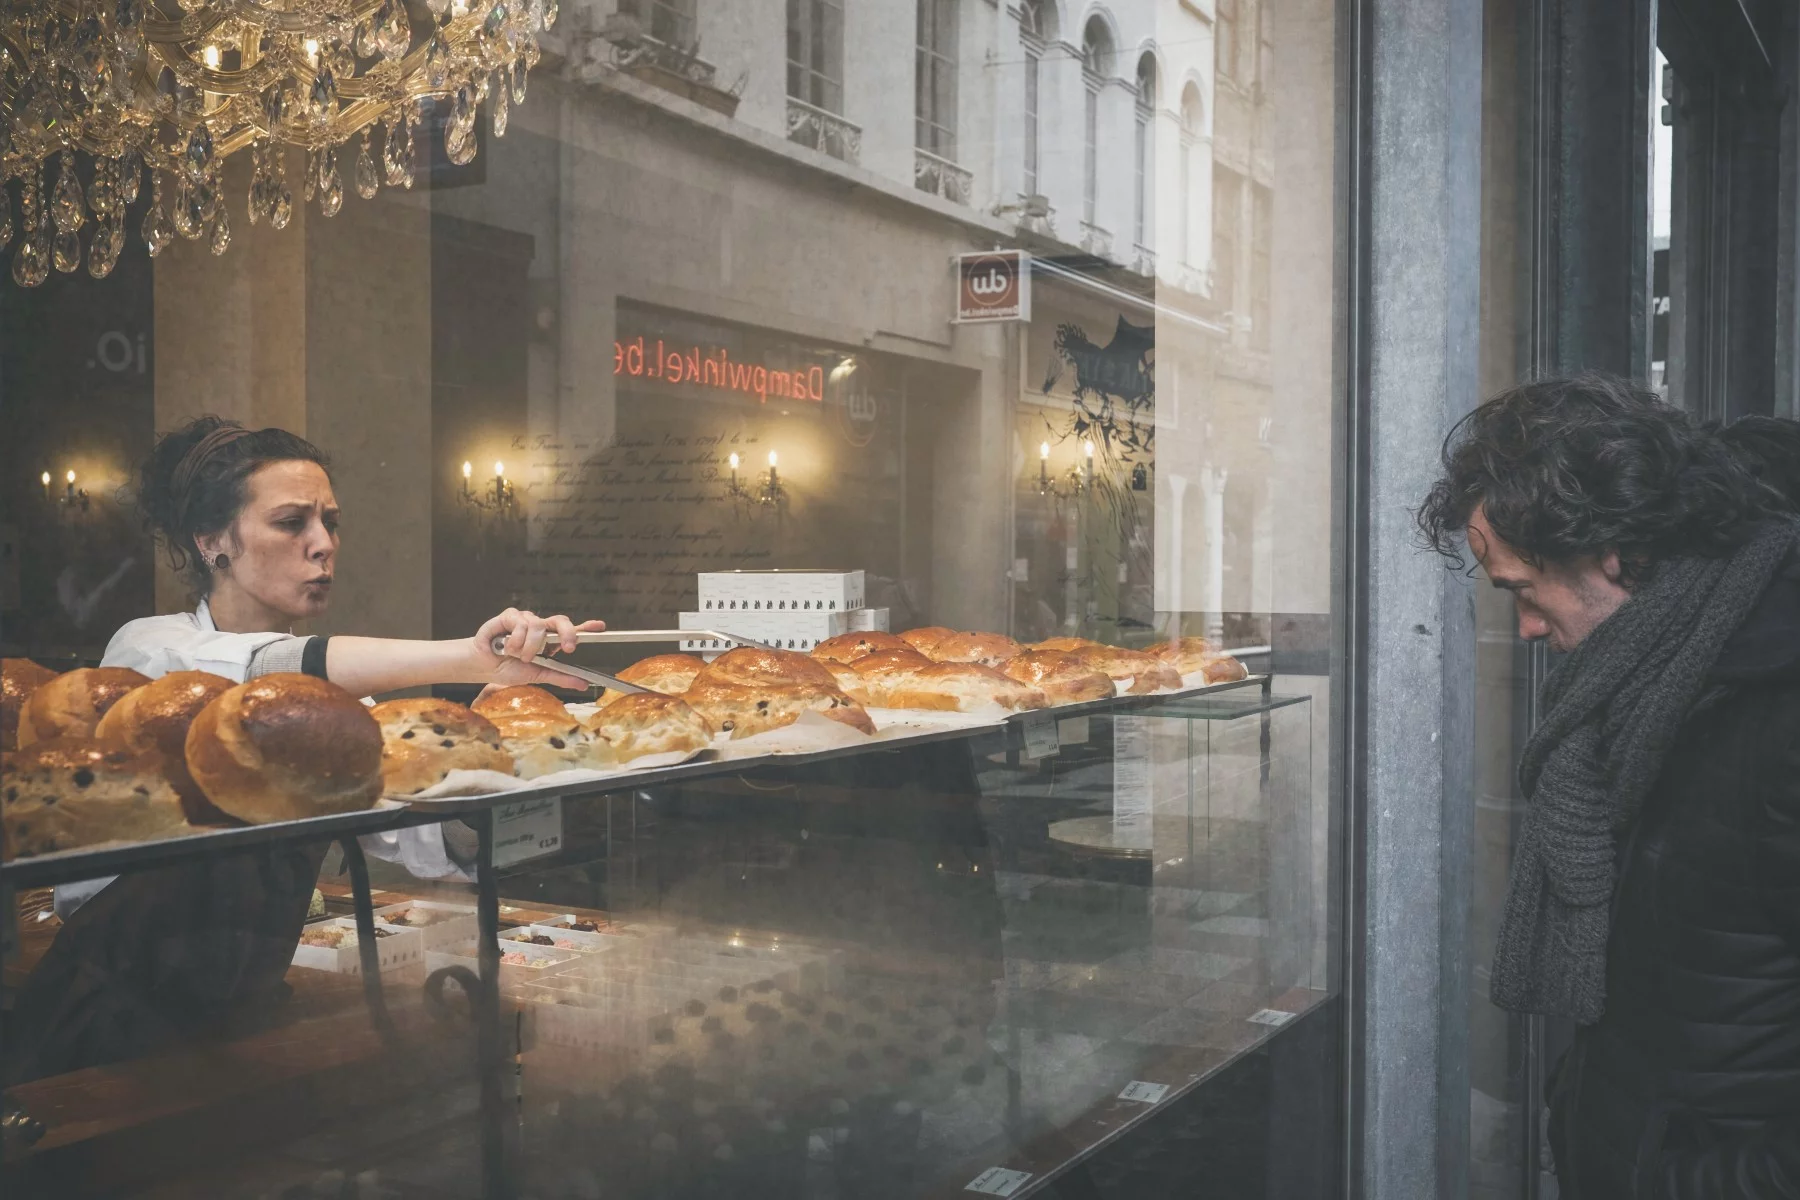 Woman working at a bakery looking angry while she is grabbing one of the buns in the window display. Man is looking inside the shop.